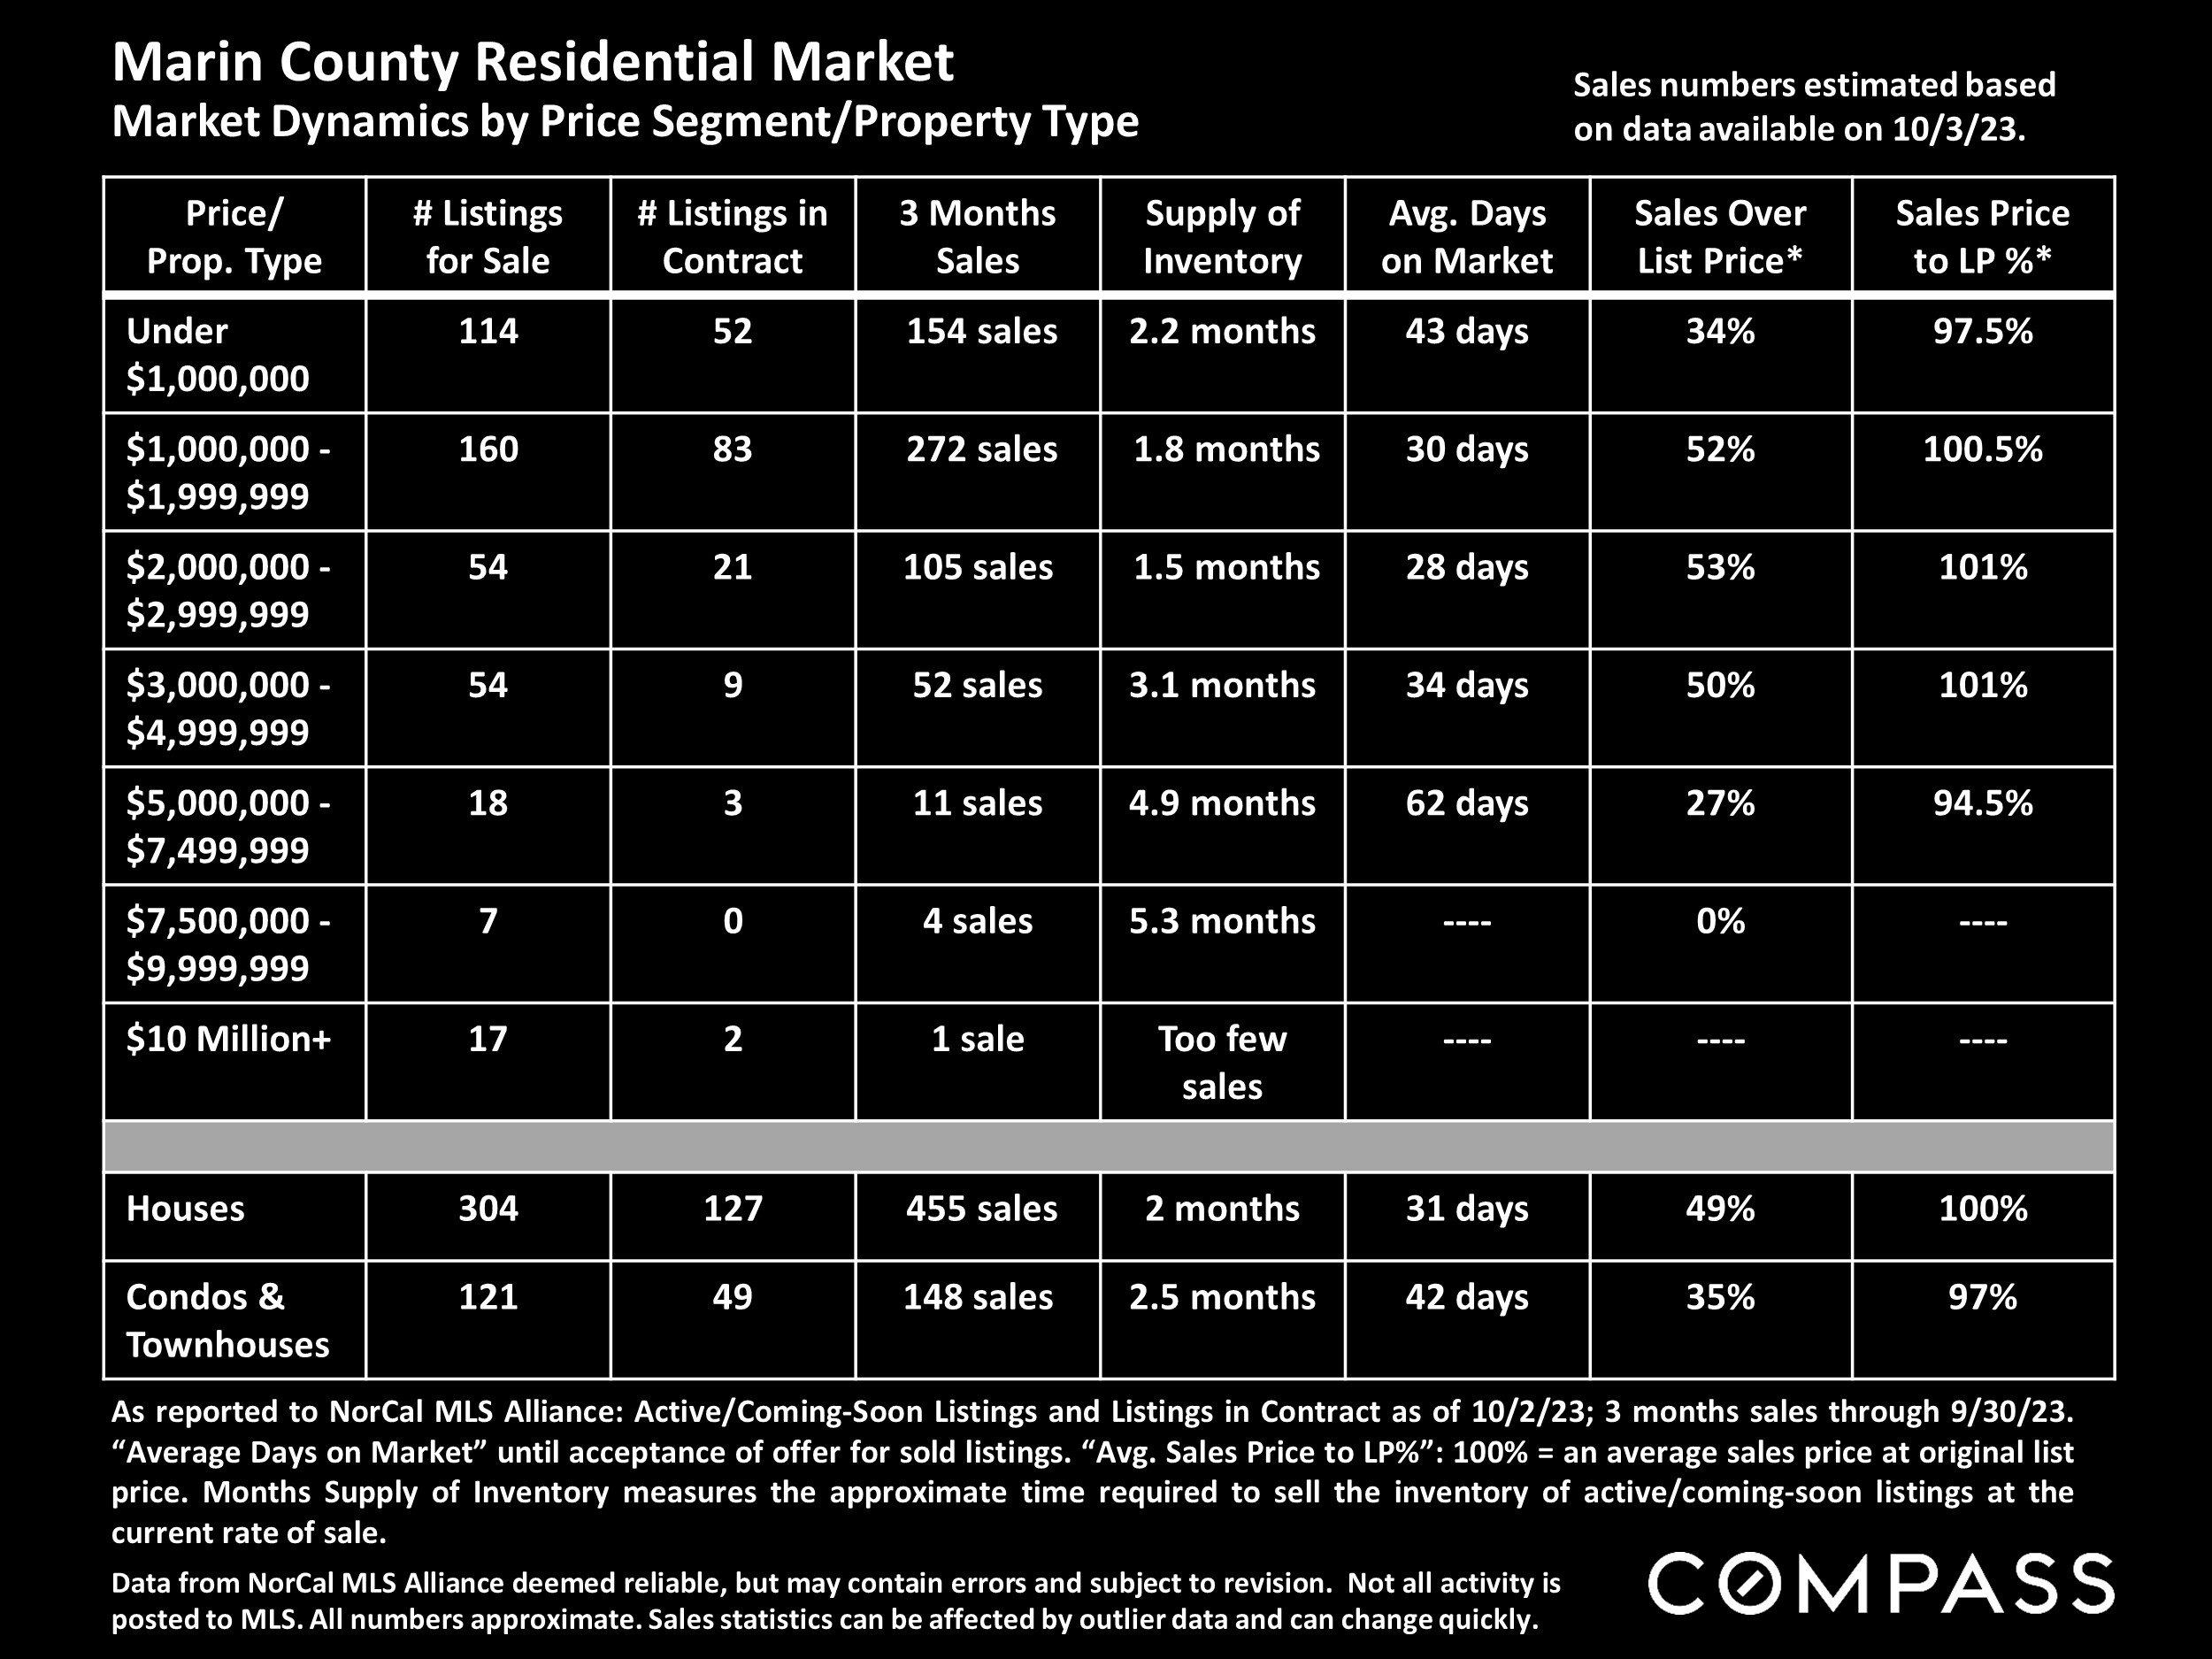 Marin County Residential Market Market Dynamics by Price Segment/Property Type